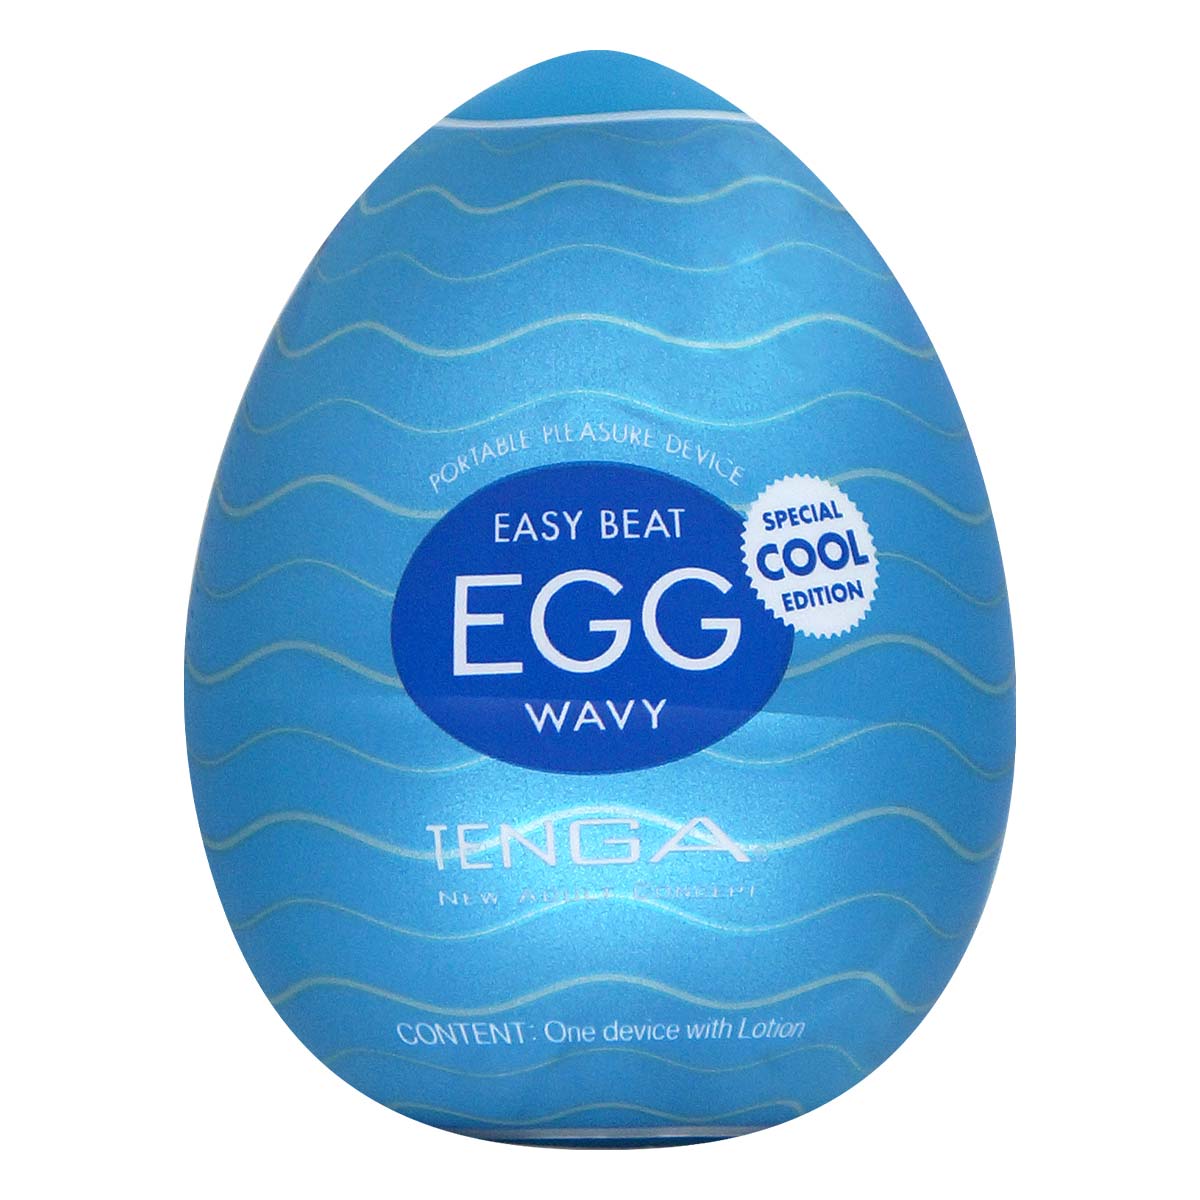 TENGA COOL EGG SPECIAL COOL EDITION-p_2